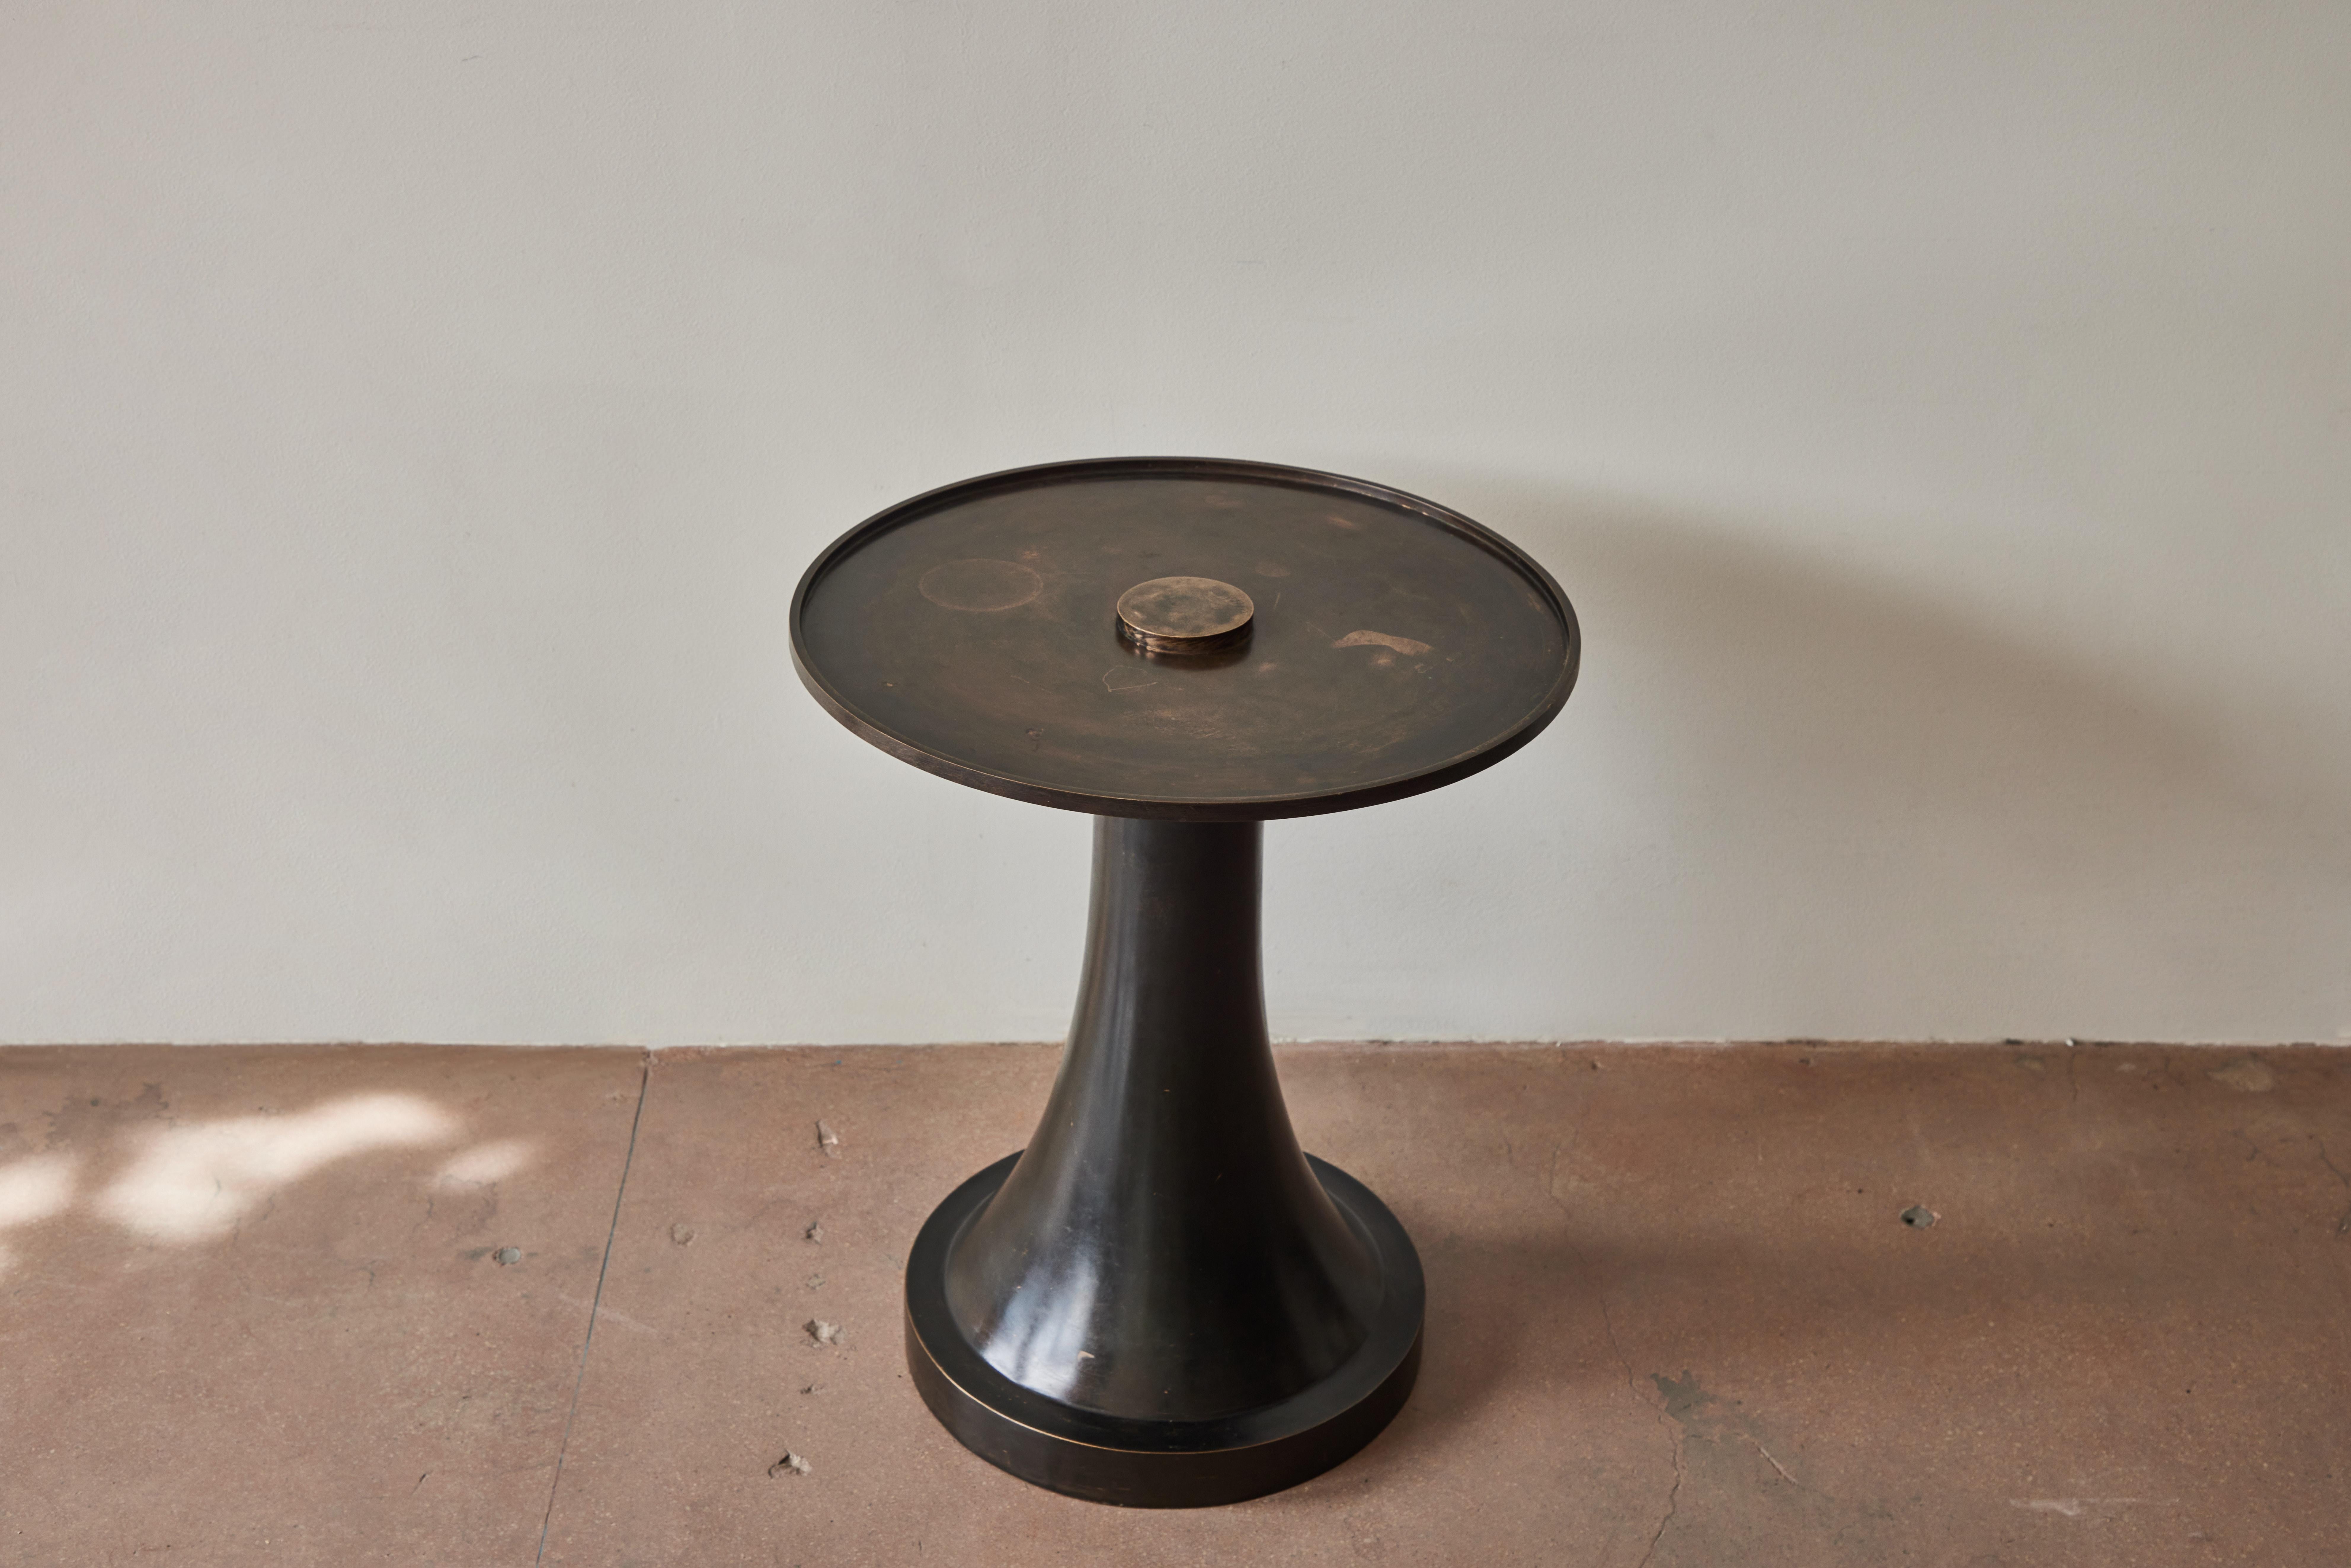 Bomarzo side table in solid bronze with black patina finish designed by Eric Schmitt for Christian Liaigre. Impressed marks ES POUR C. LIAIGRE. Made in France circa 2013

Biography via Galerie En Attendant les Barbares:

“My work is the